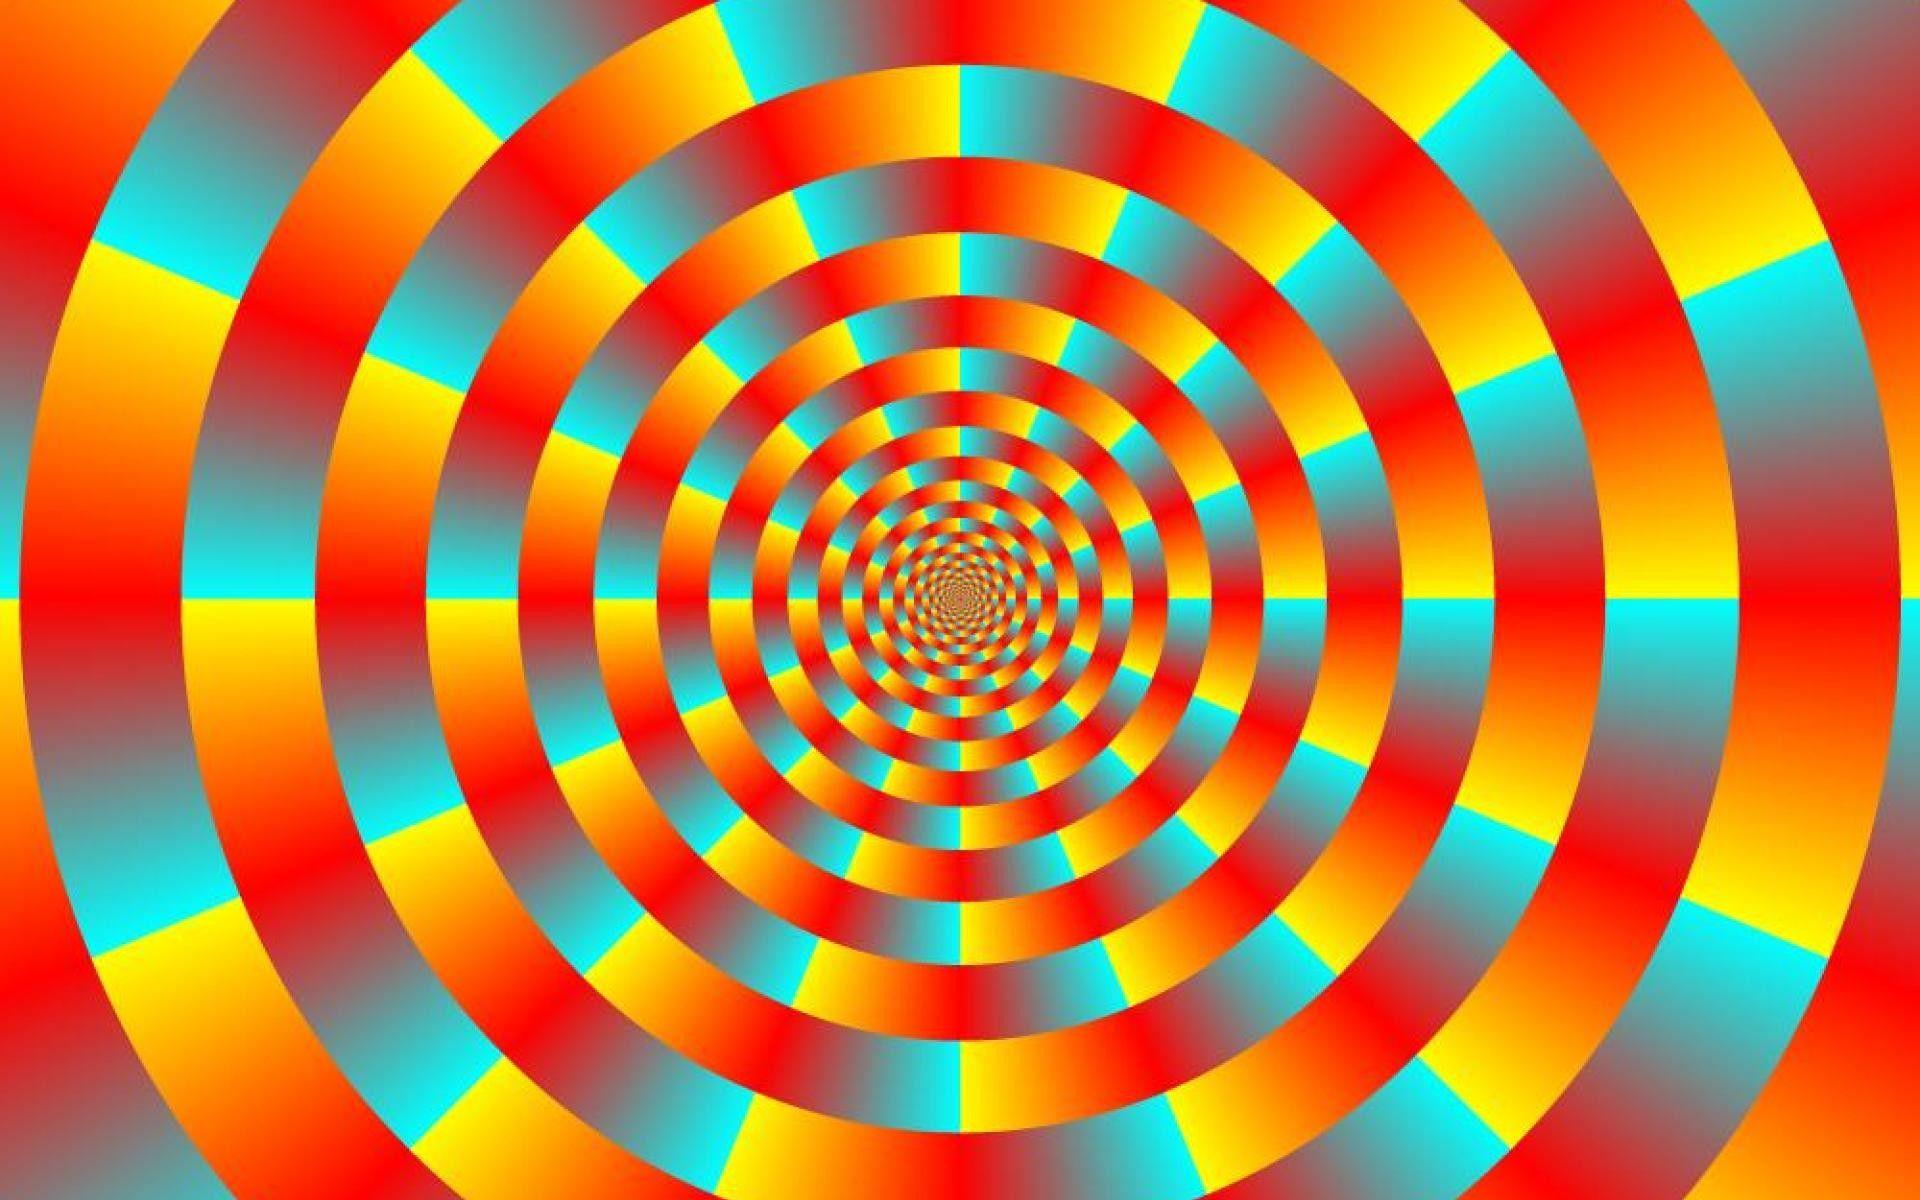 Trippy Optical Illusions That Appear to be Animated Use as Phone Wallpaper  if You Want to go Crazy  BOOOOOOOM  CREATE  INSPIRE  COMMUNITY  ART   DESIGN  MUSIC  FILM  PHOTO  PROJECTS